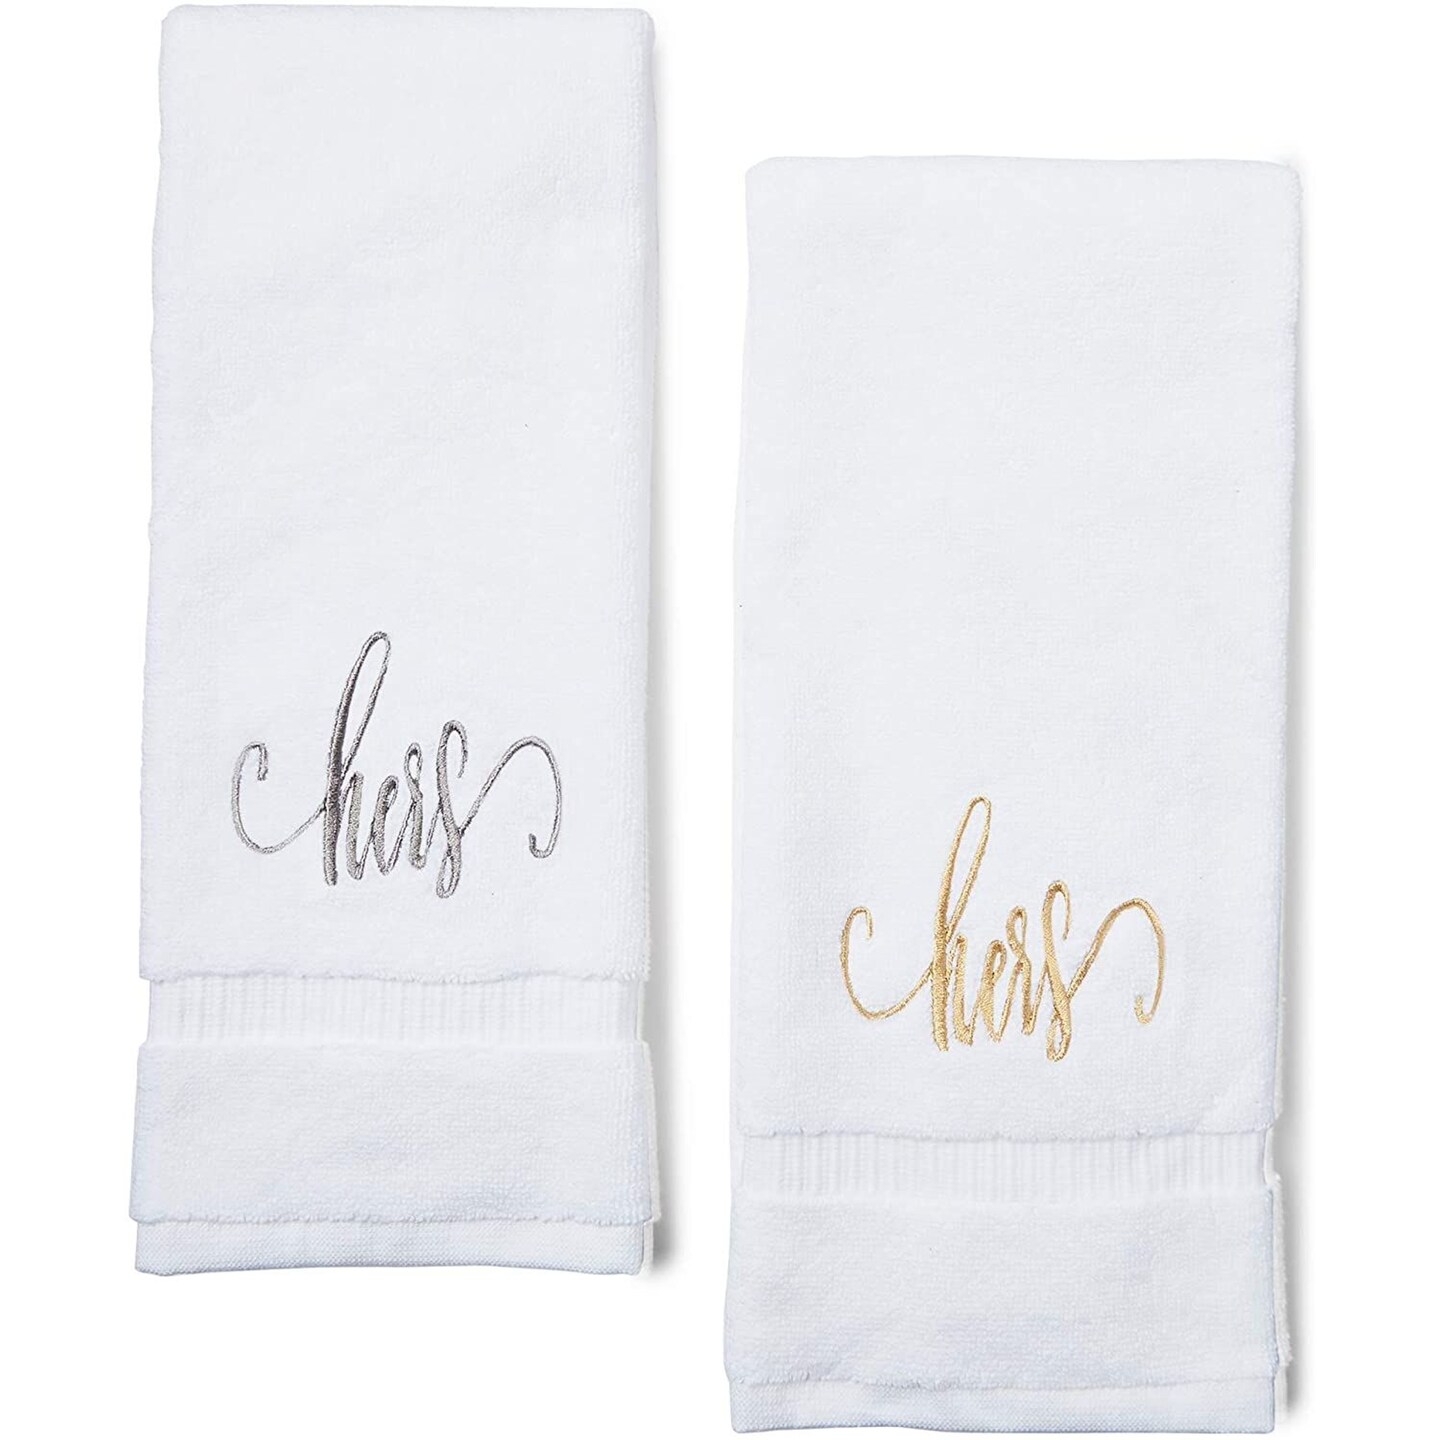 Hers and Hers Monogrammed Hand Towels Wedding Gift for Lesbian Couple Women (16 x 30 in, Set of 2)